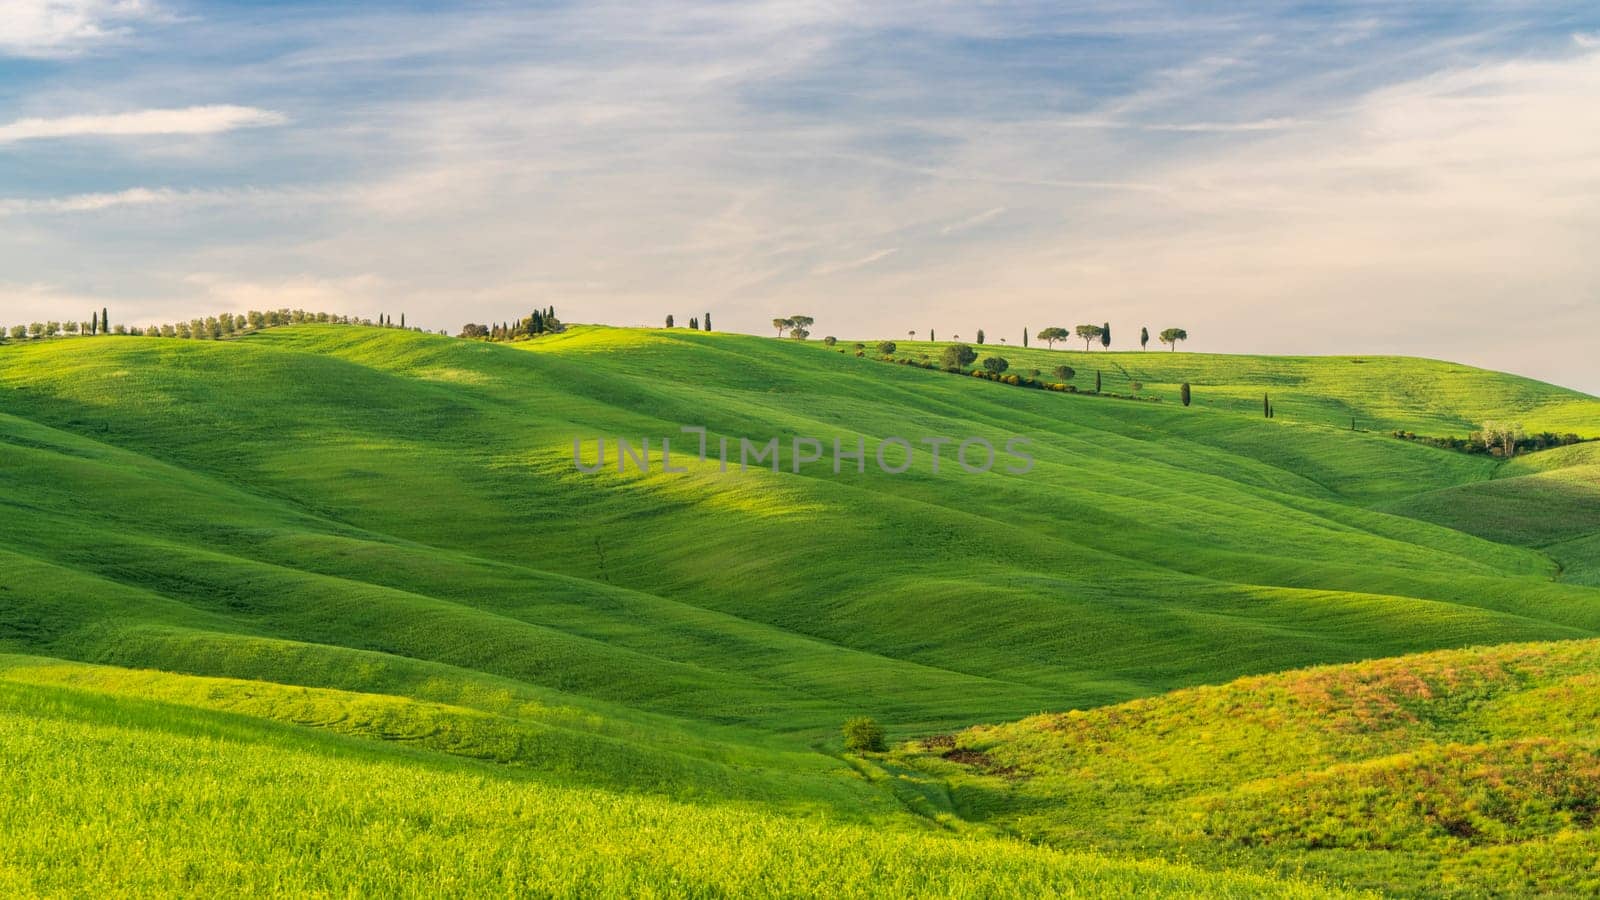 Hills of Tuscany. Val d'Orcia landscape in spring. Cypresses, hills and green meadows by Sonat